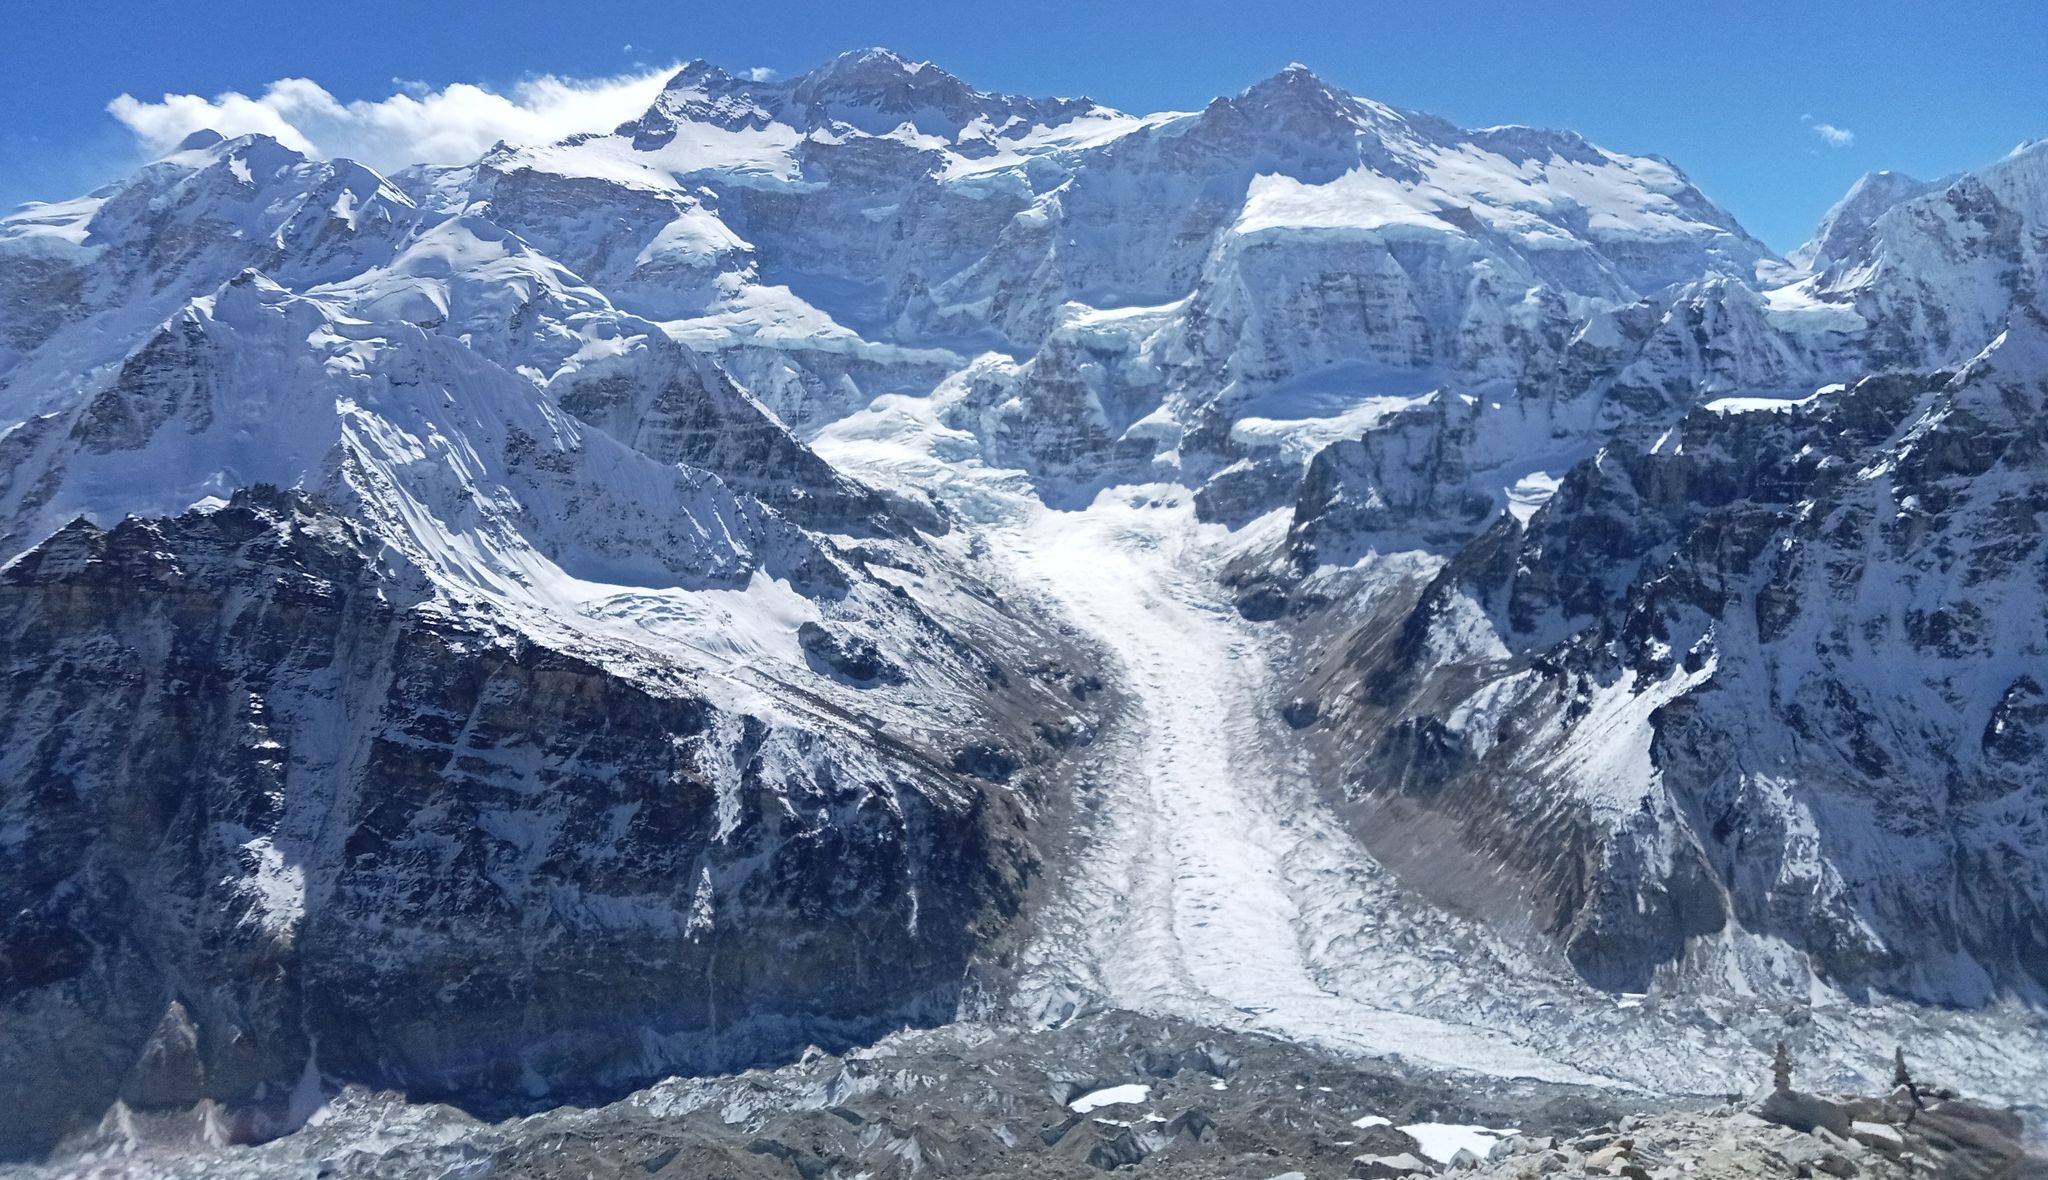 Mount Kangchenjunga from above Pang Pema on the North Side